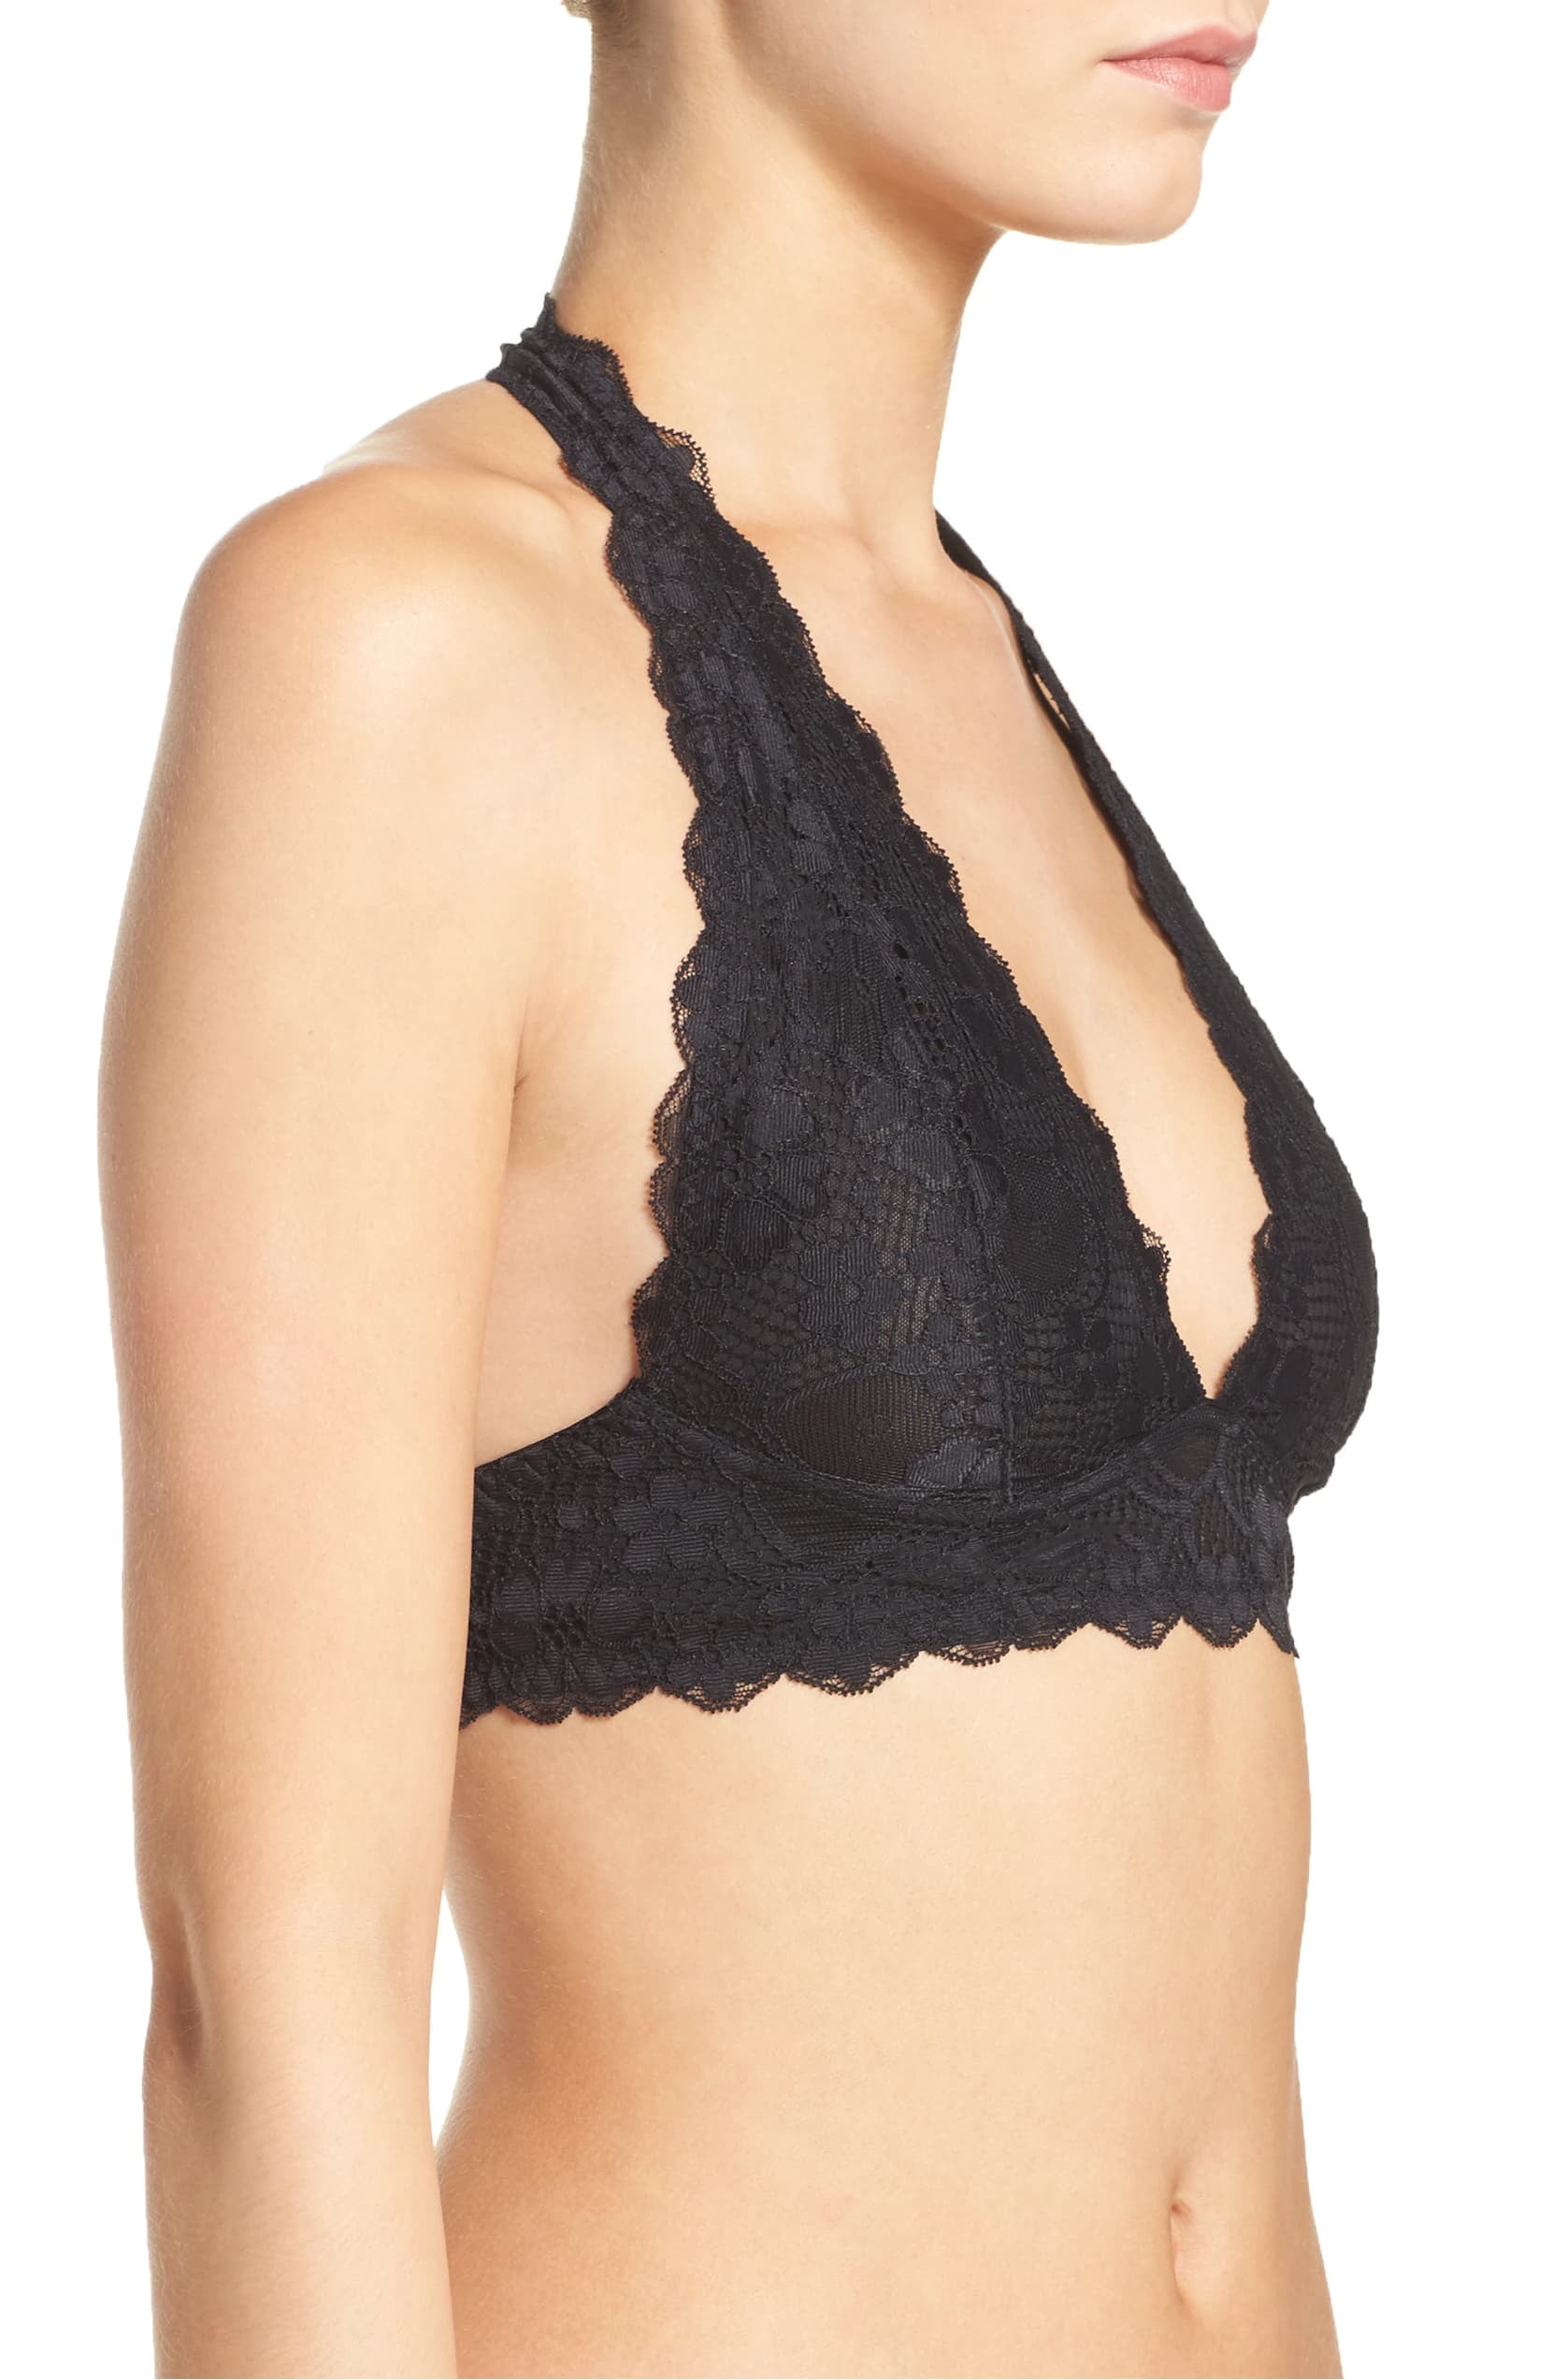 Intimately Free People Women's Galloon Lace Halter Bralette Black Size M 